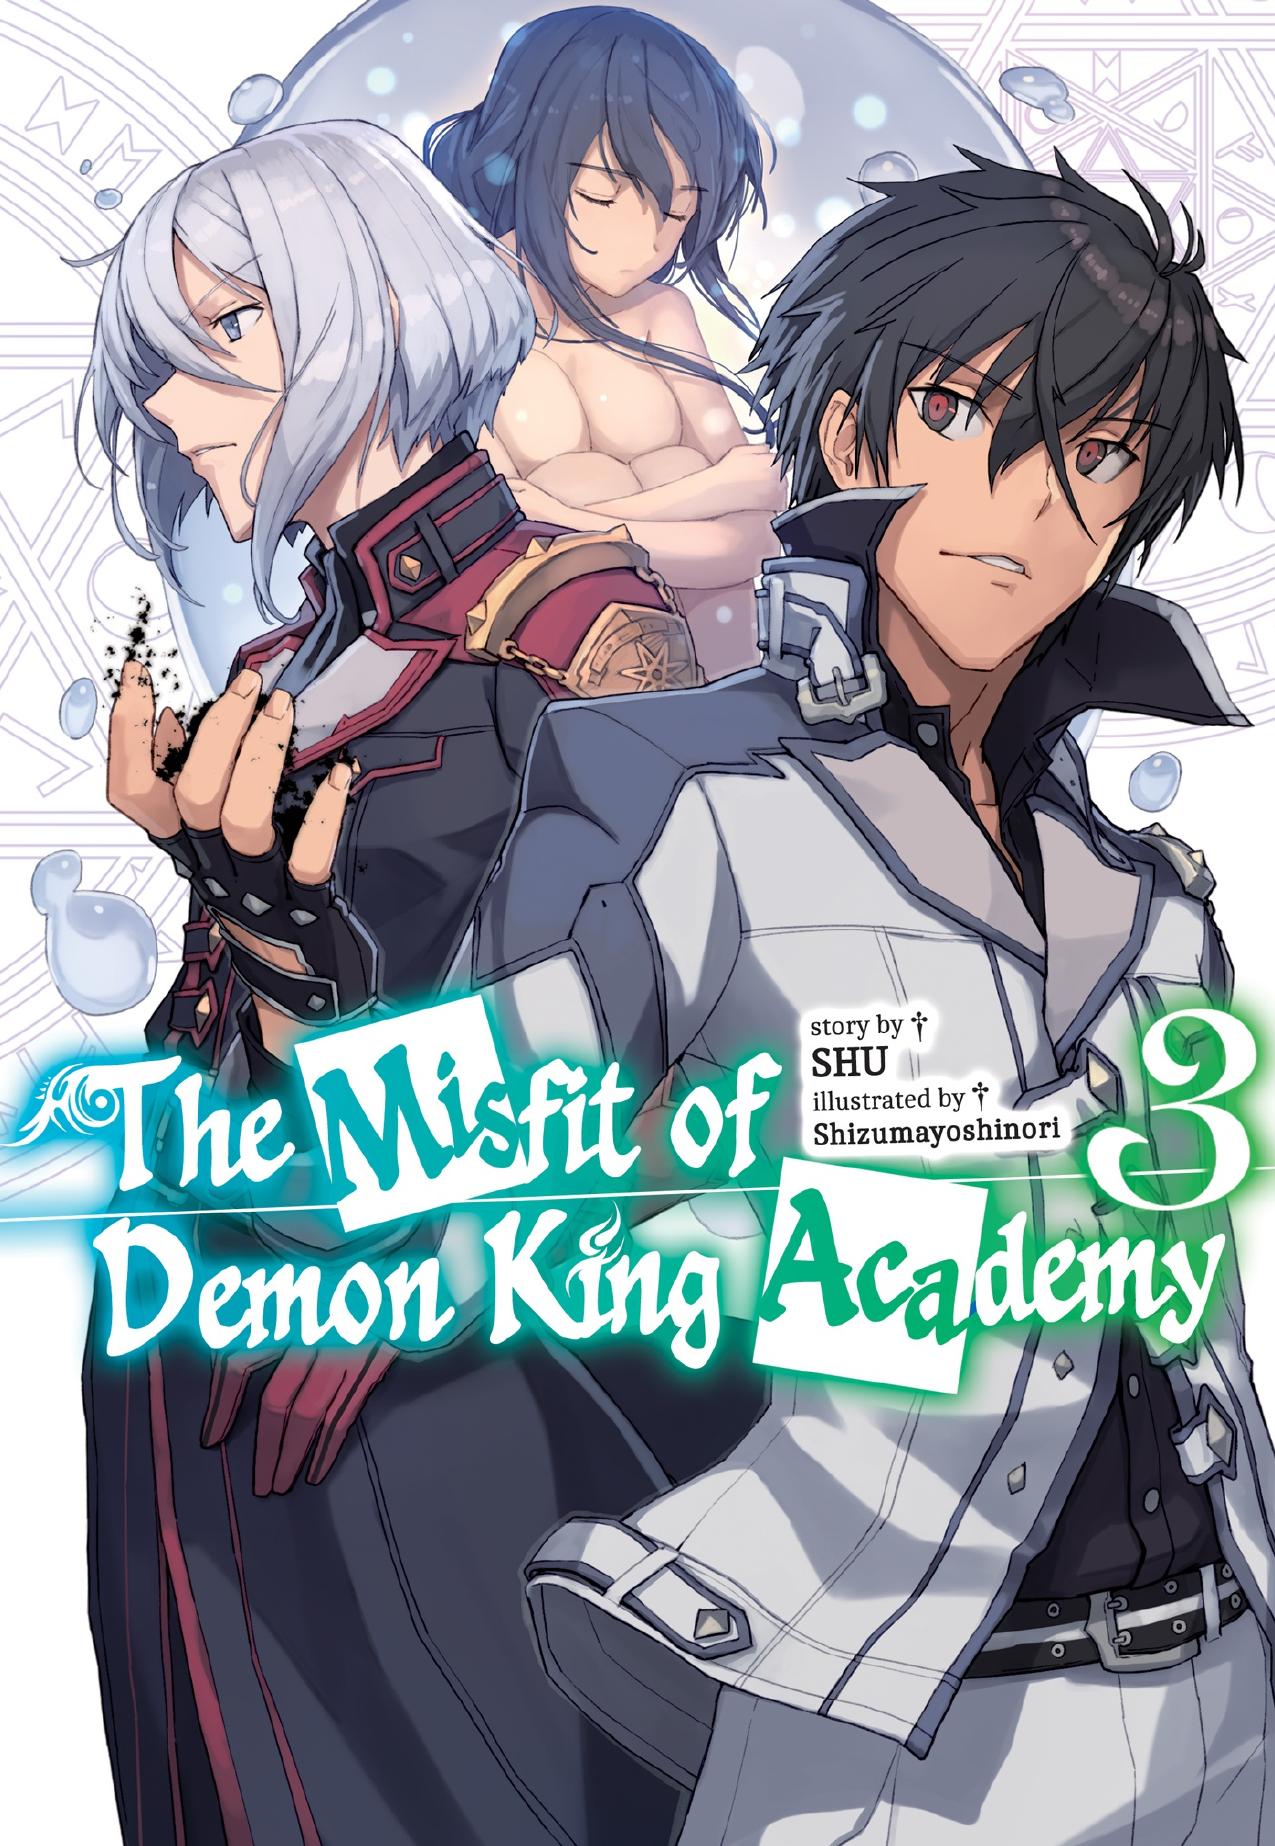 The Misfit of Demon King Academy: Volume 3 by SHU